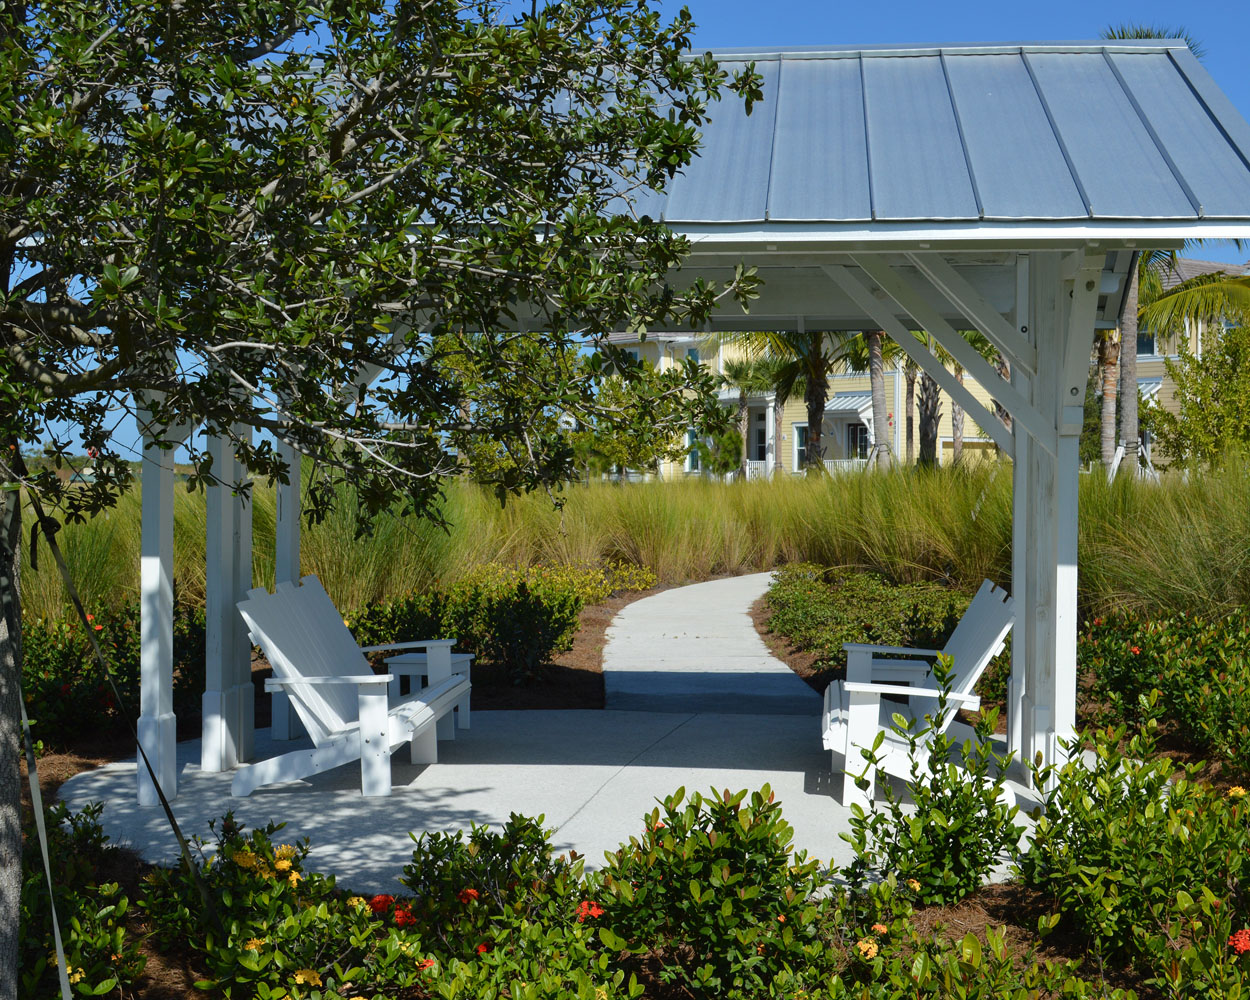 Harbour Isle Shade Structure with Chairs